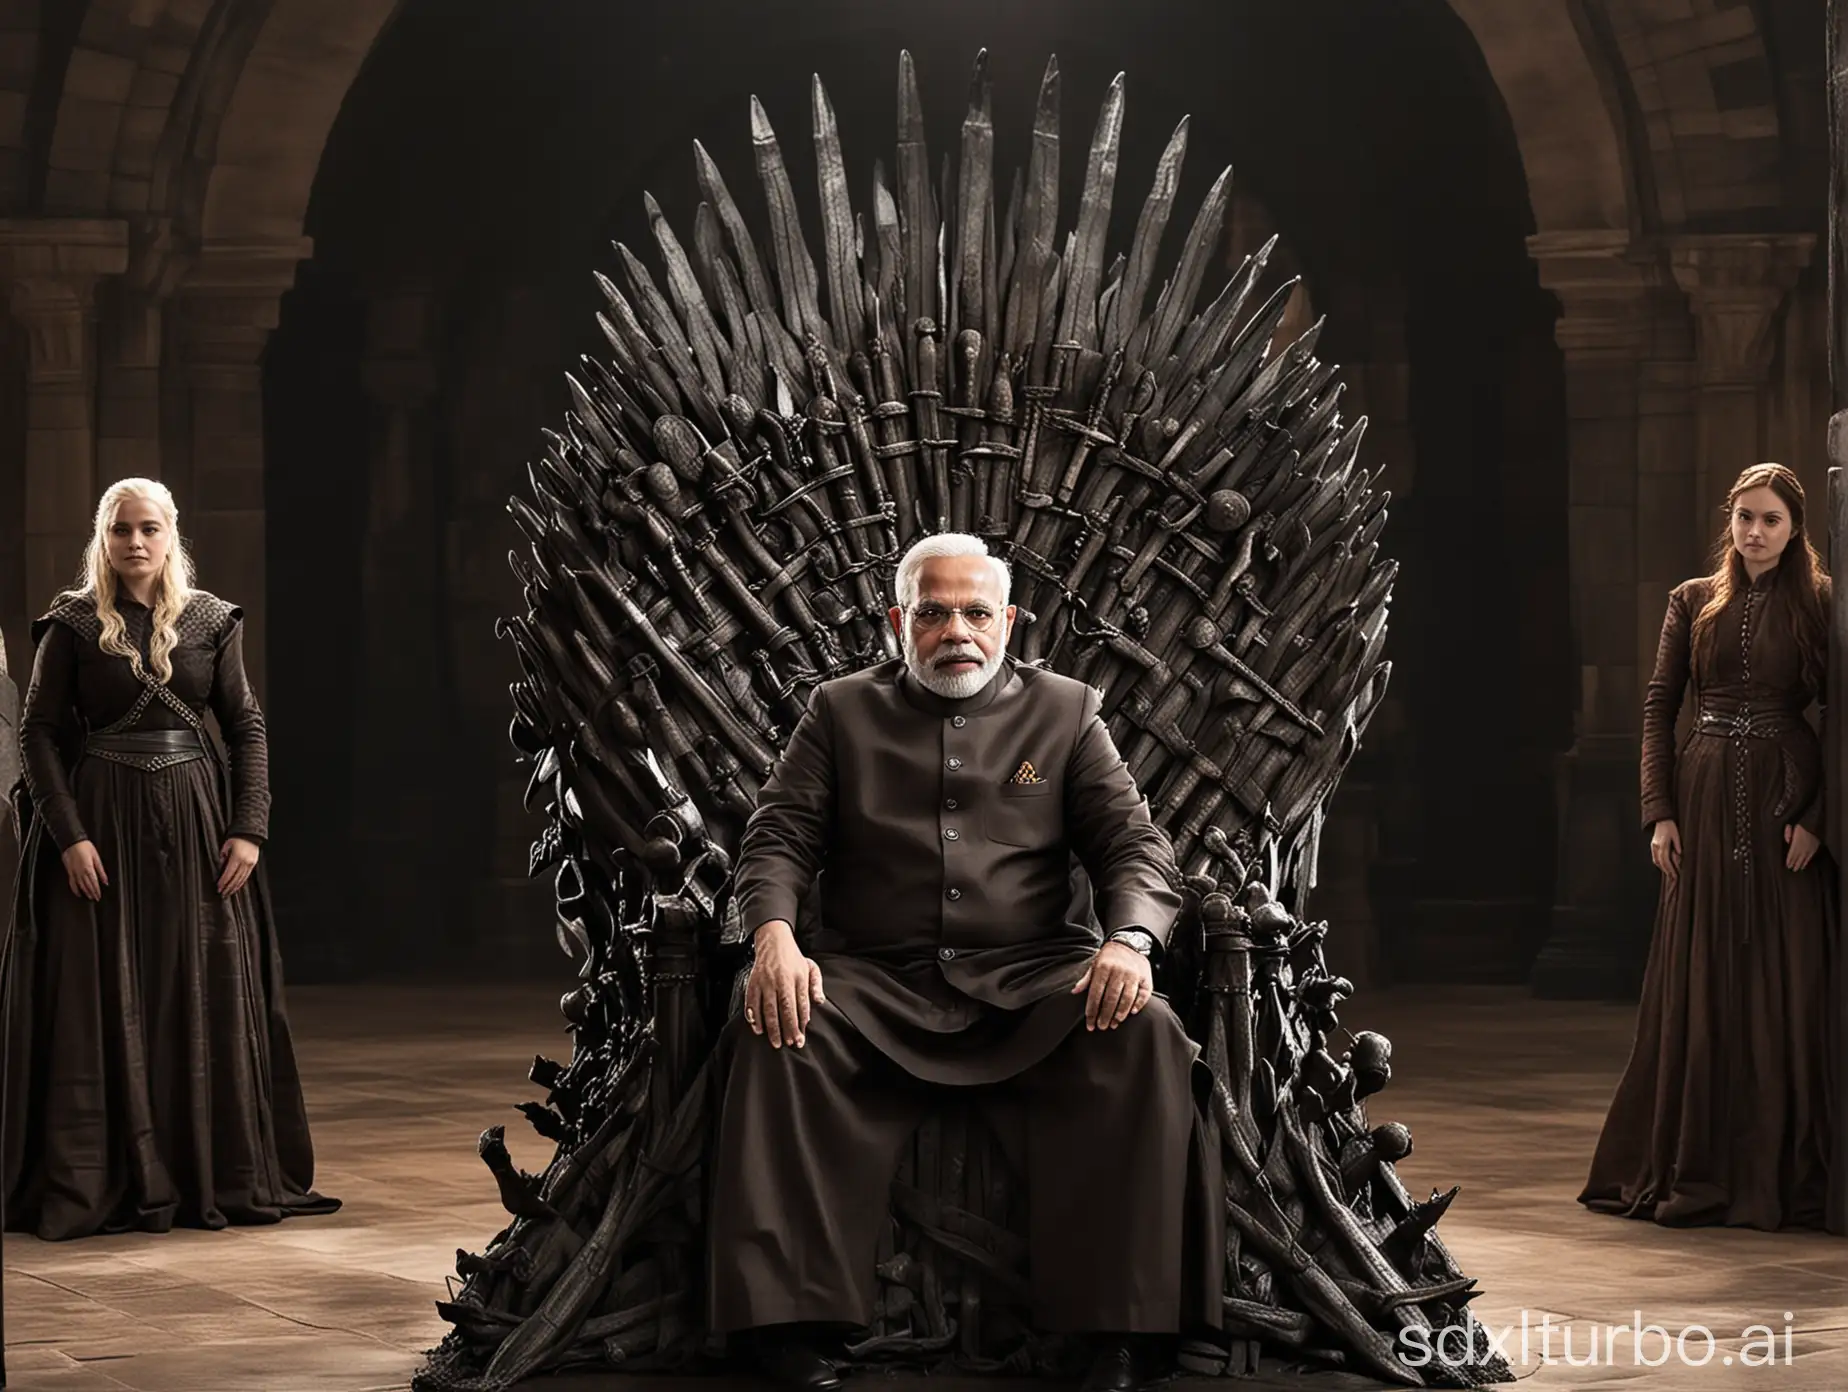 Narendra-Modi-Seated-on-the-Iron-Throne-in-Game-of-Thrones